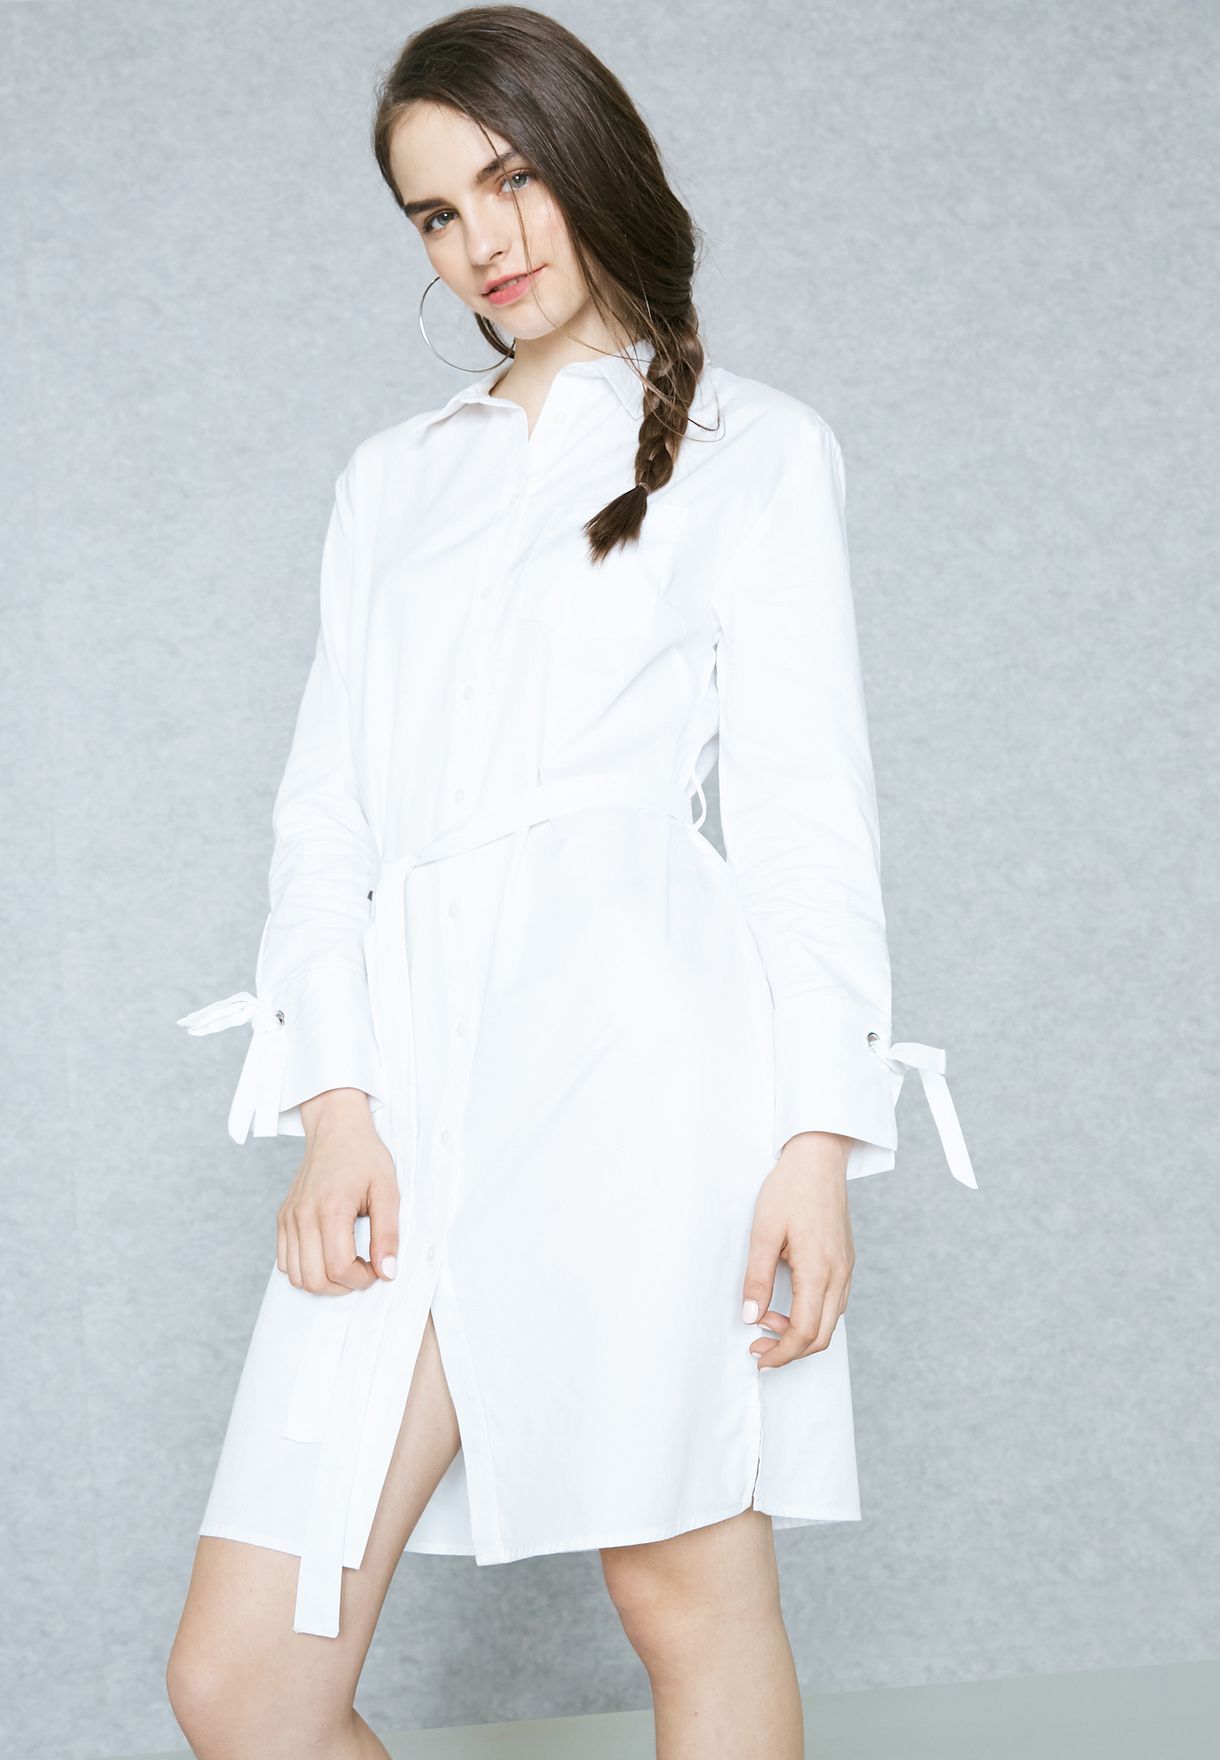 New Look White Shirt Dress Clearance ...